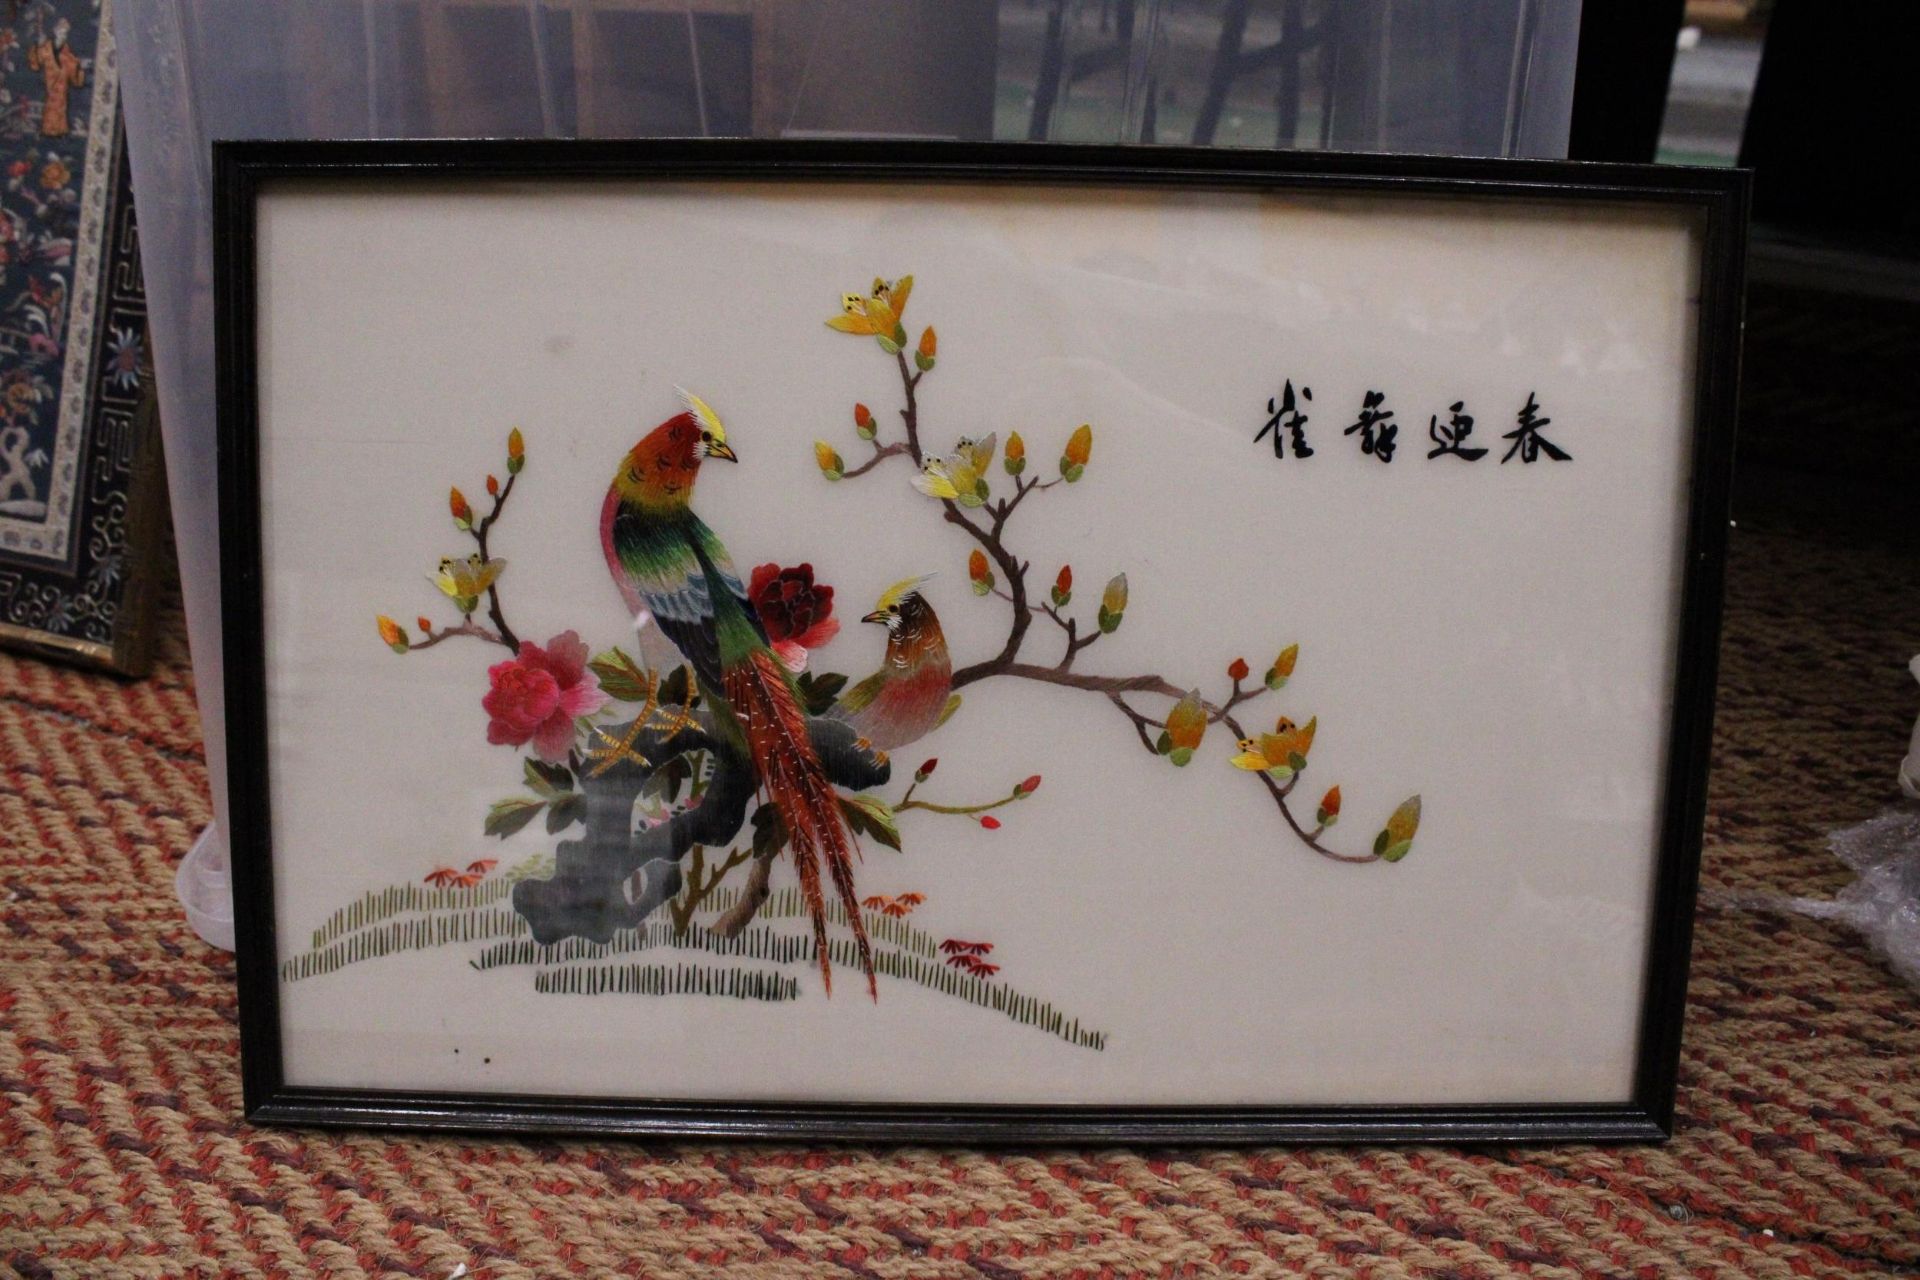 THREE VINTAGE ORIENTAL DEPICTING BIRDS HAND EMBROIDERED SILKS IN FRAMES - Image 4 of 4